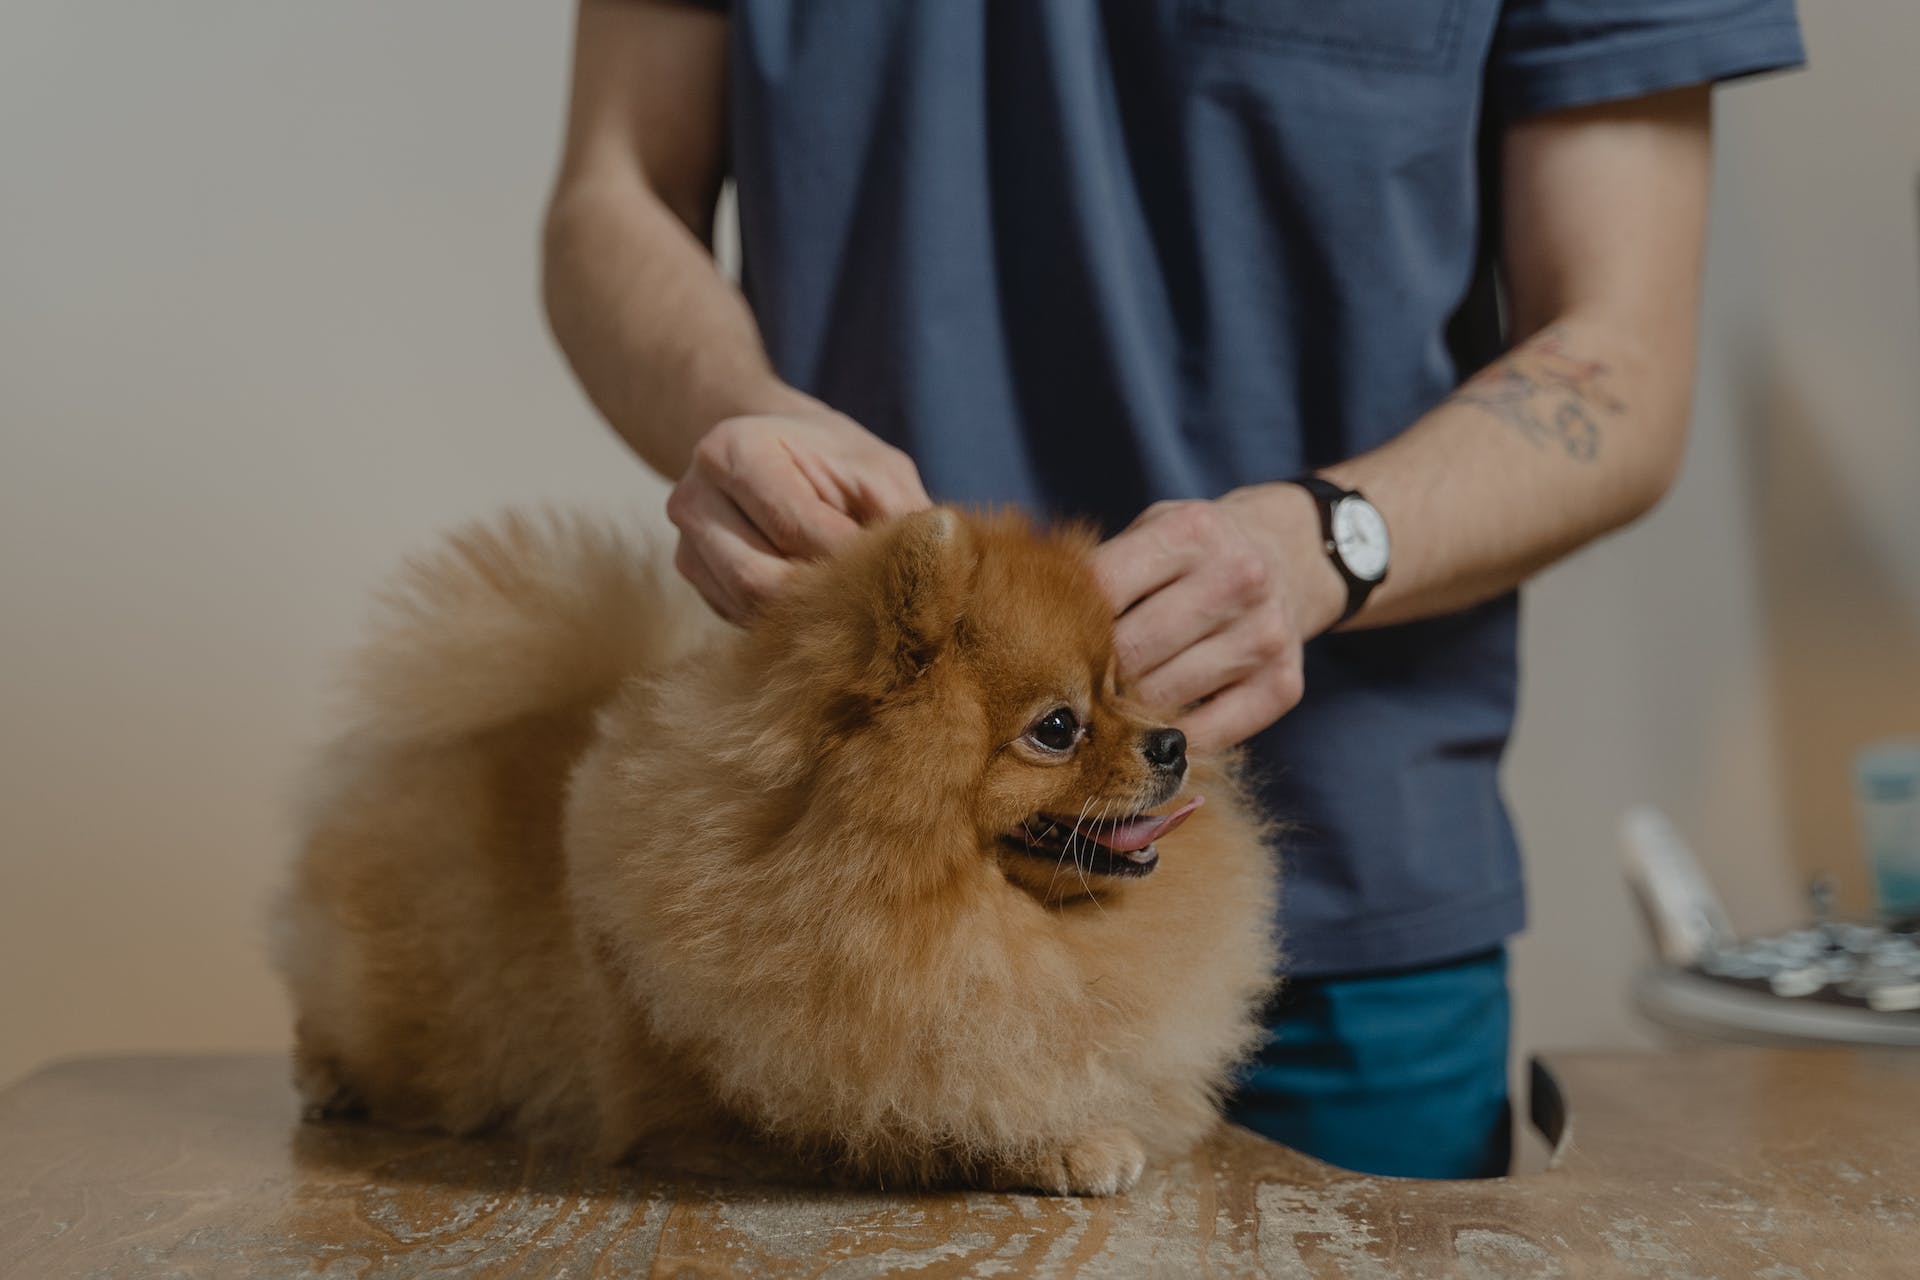 A Pomeranian dog getting checked at the vet clinic